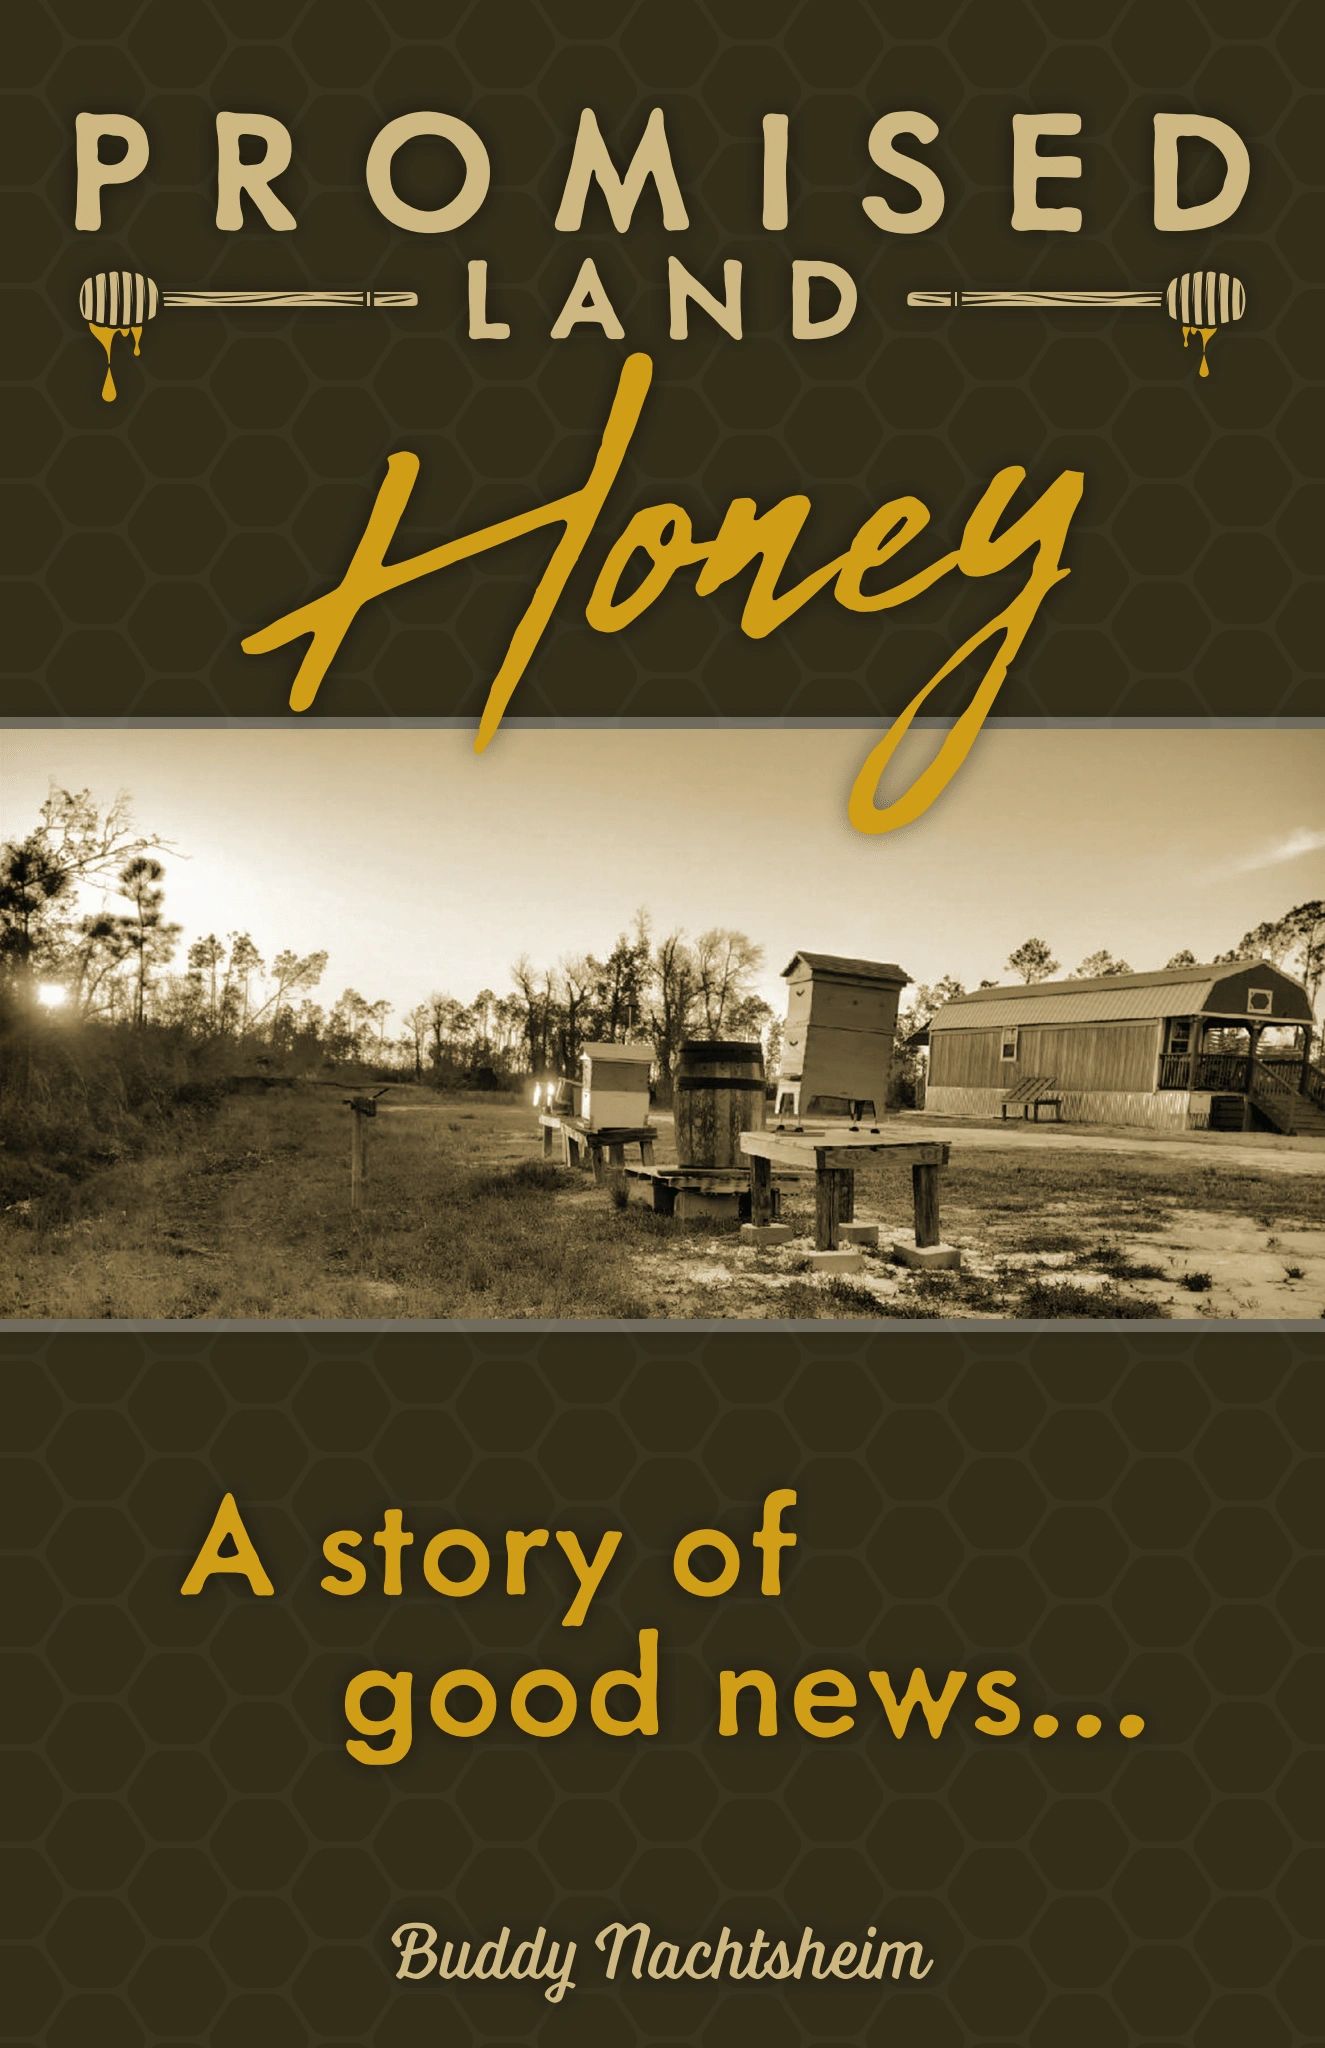 Promised Land Honey! A story of good news